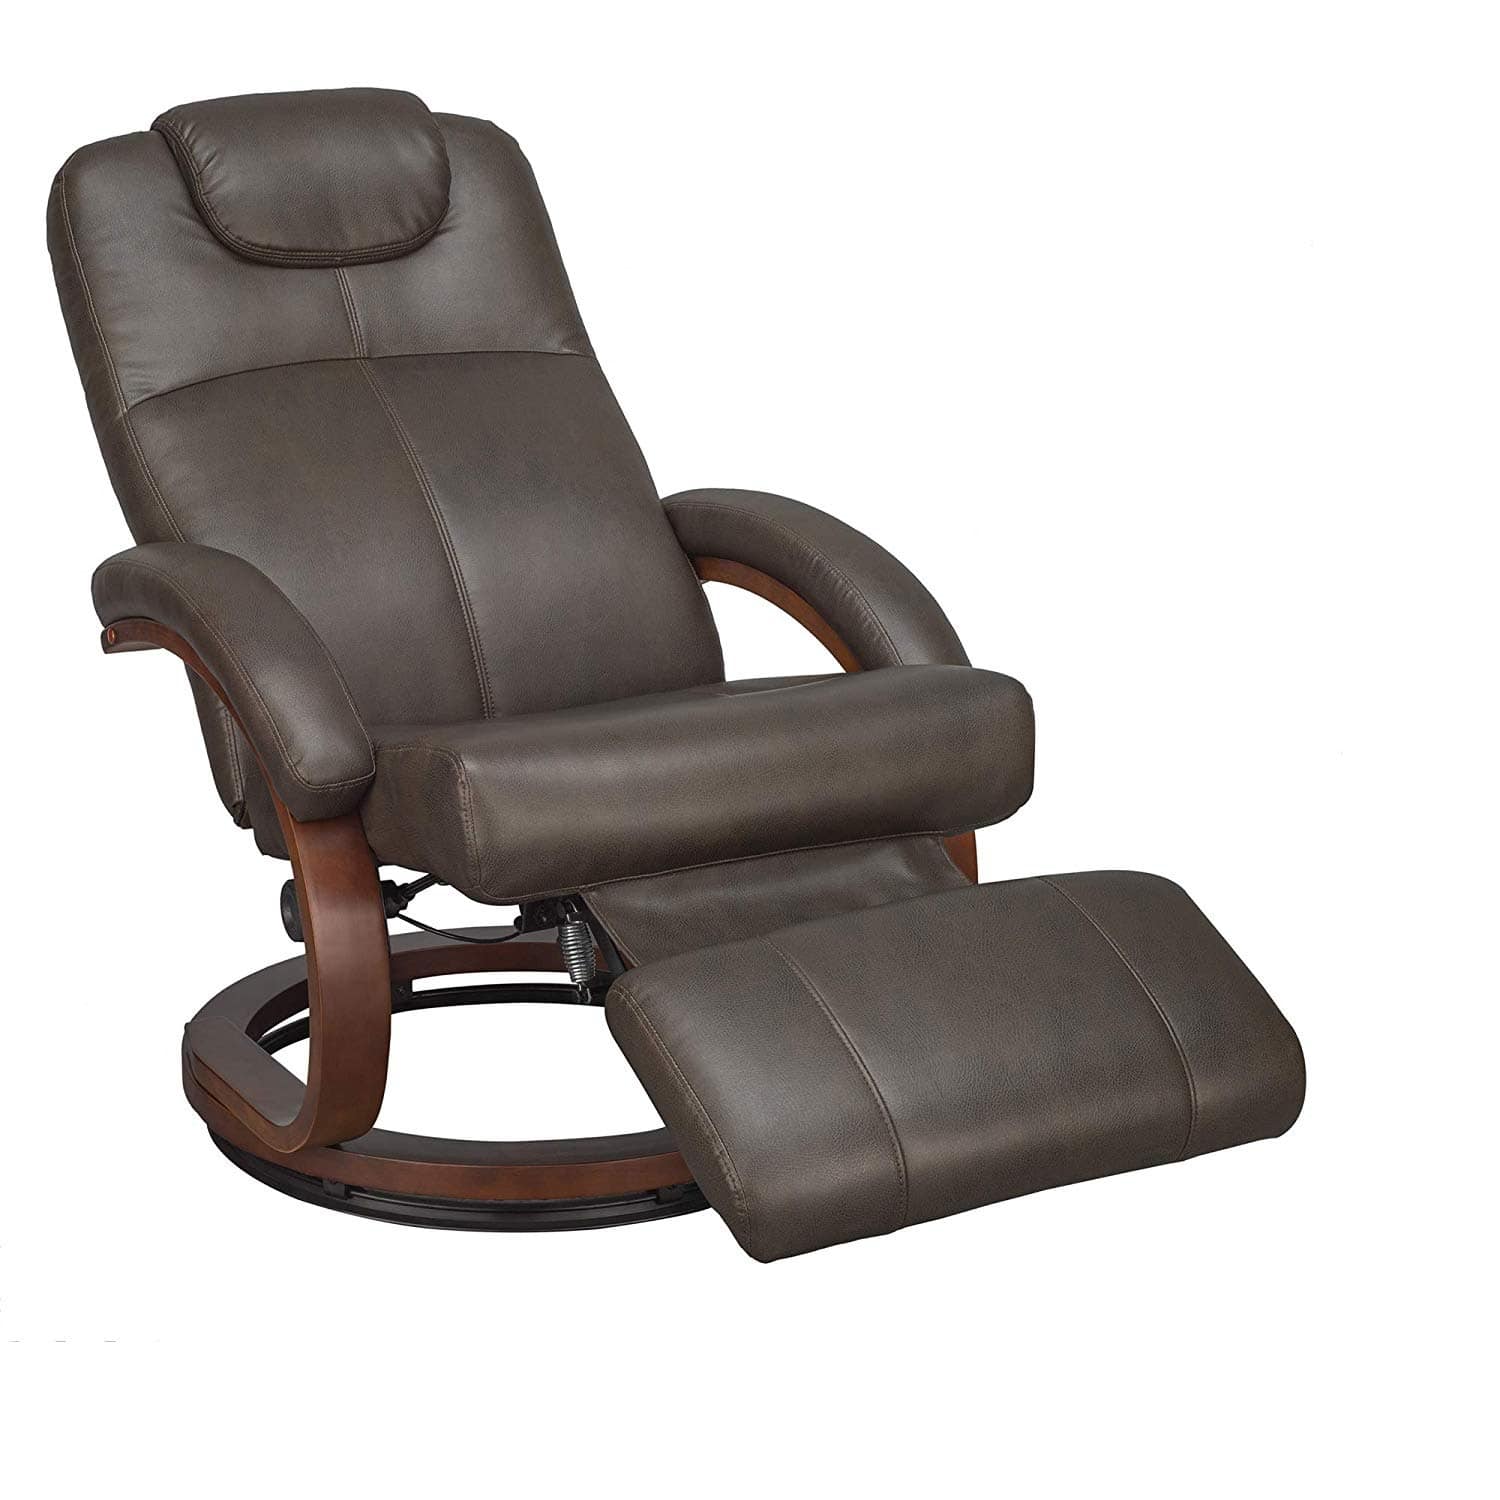 RecPro Charles Euro Chair Recliner